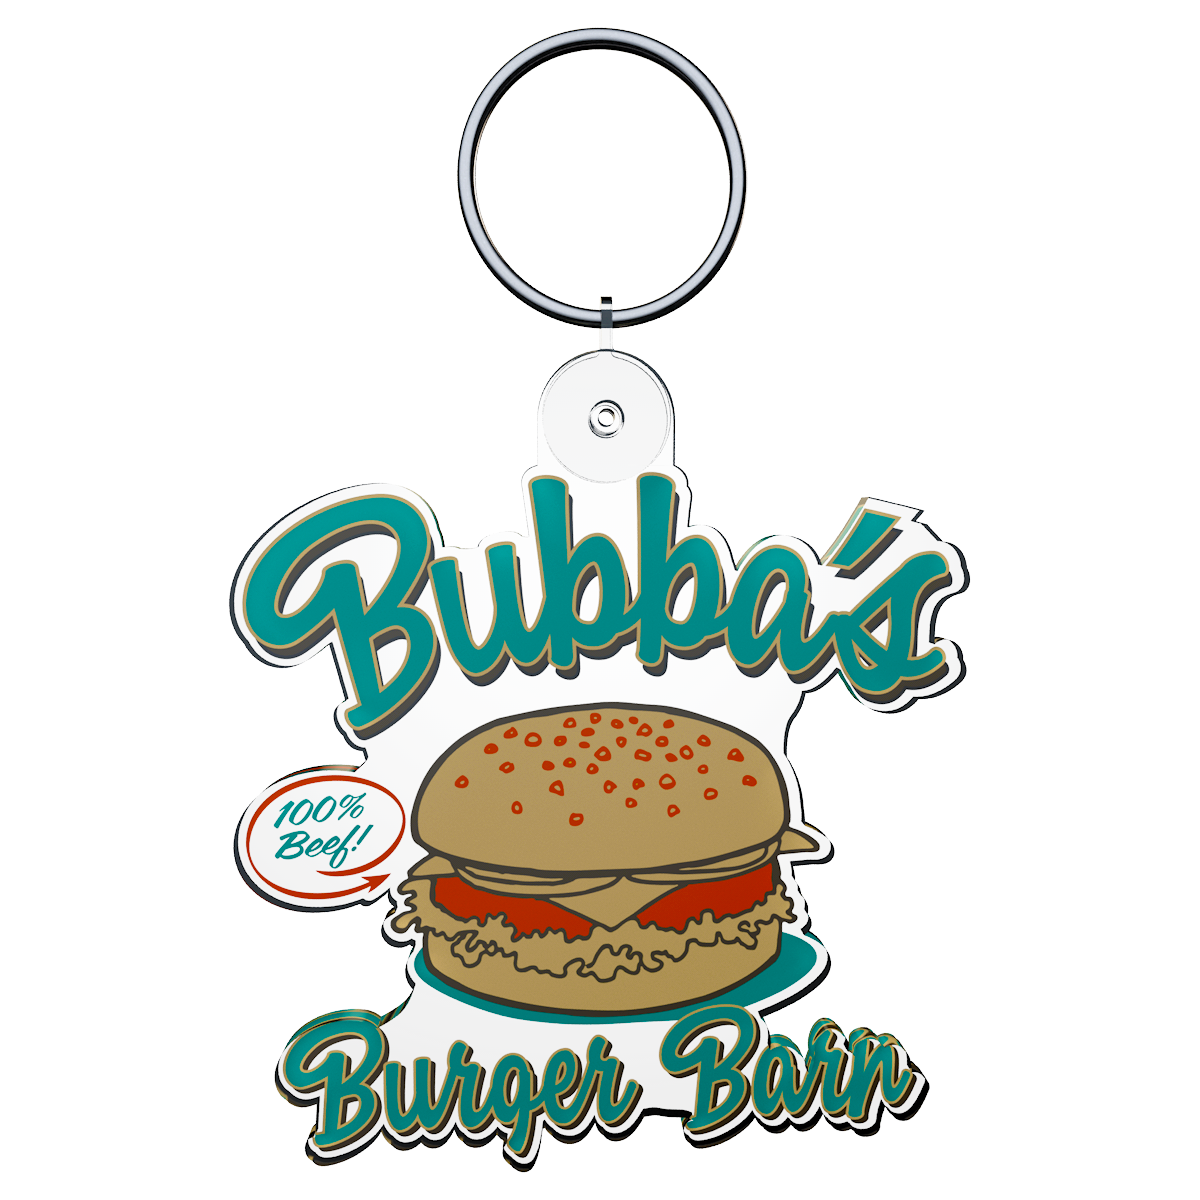 https://www.sansperf.com/wp-content/uploads/2022/09/Bubba_Keychain_Product.png